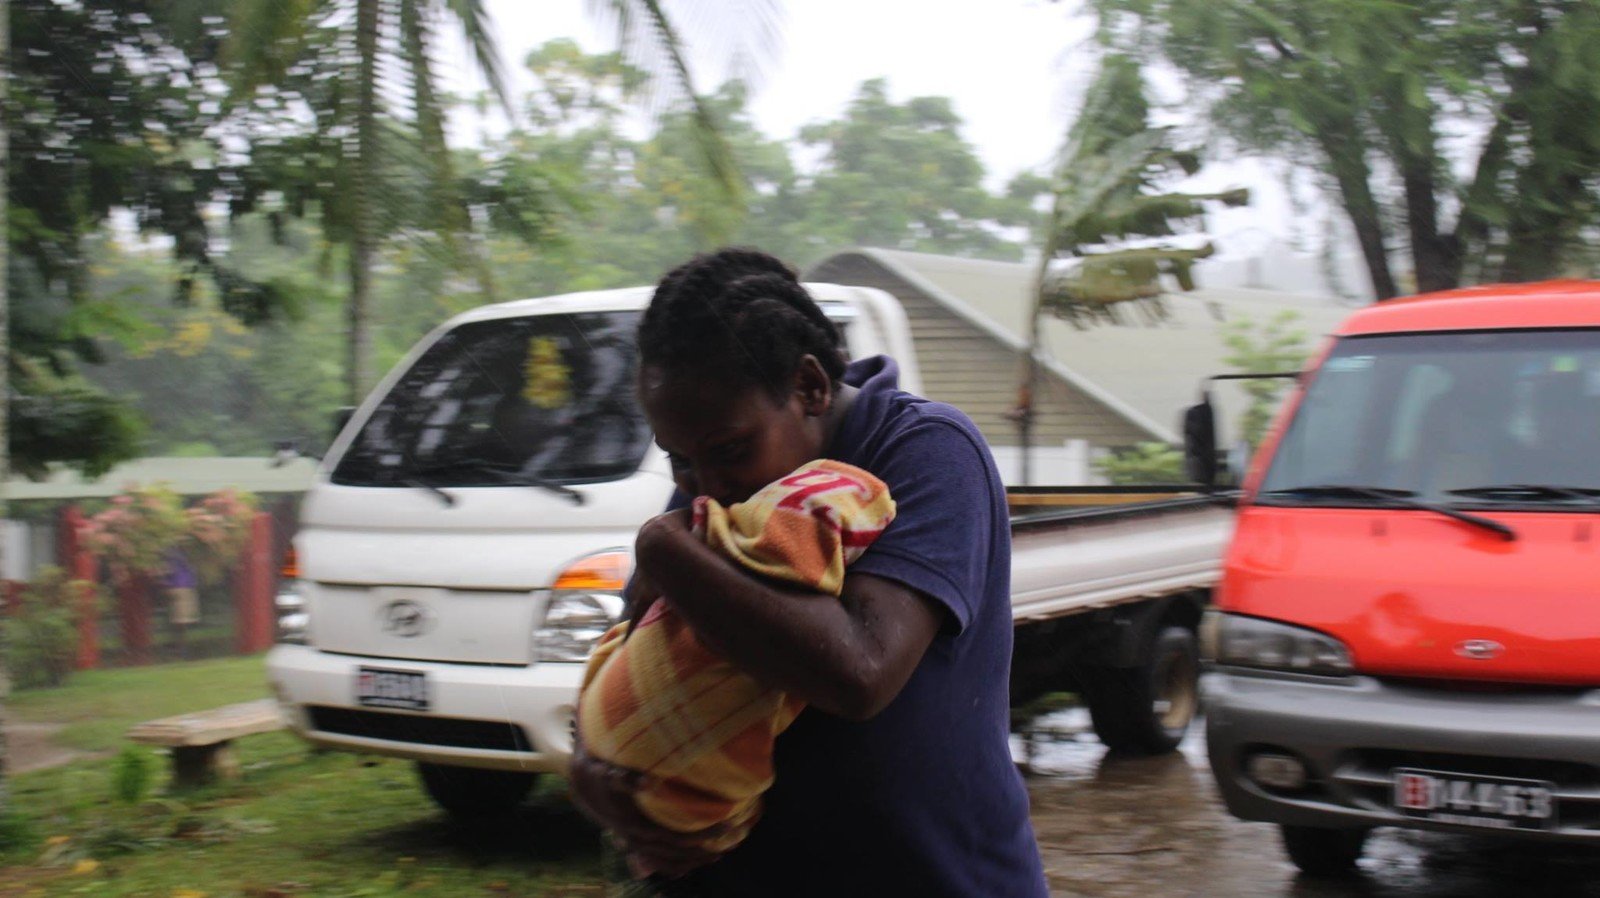 More than 250,000 people are at risk, after Cyclone Pam made a direct hit on Vanuatu on 14 March, tearing through the archipelago with winds of up to 250kmh. (IssoNihmei/350.org)